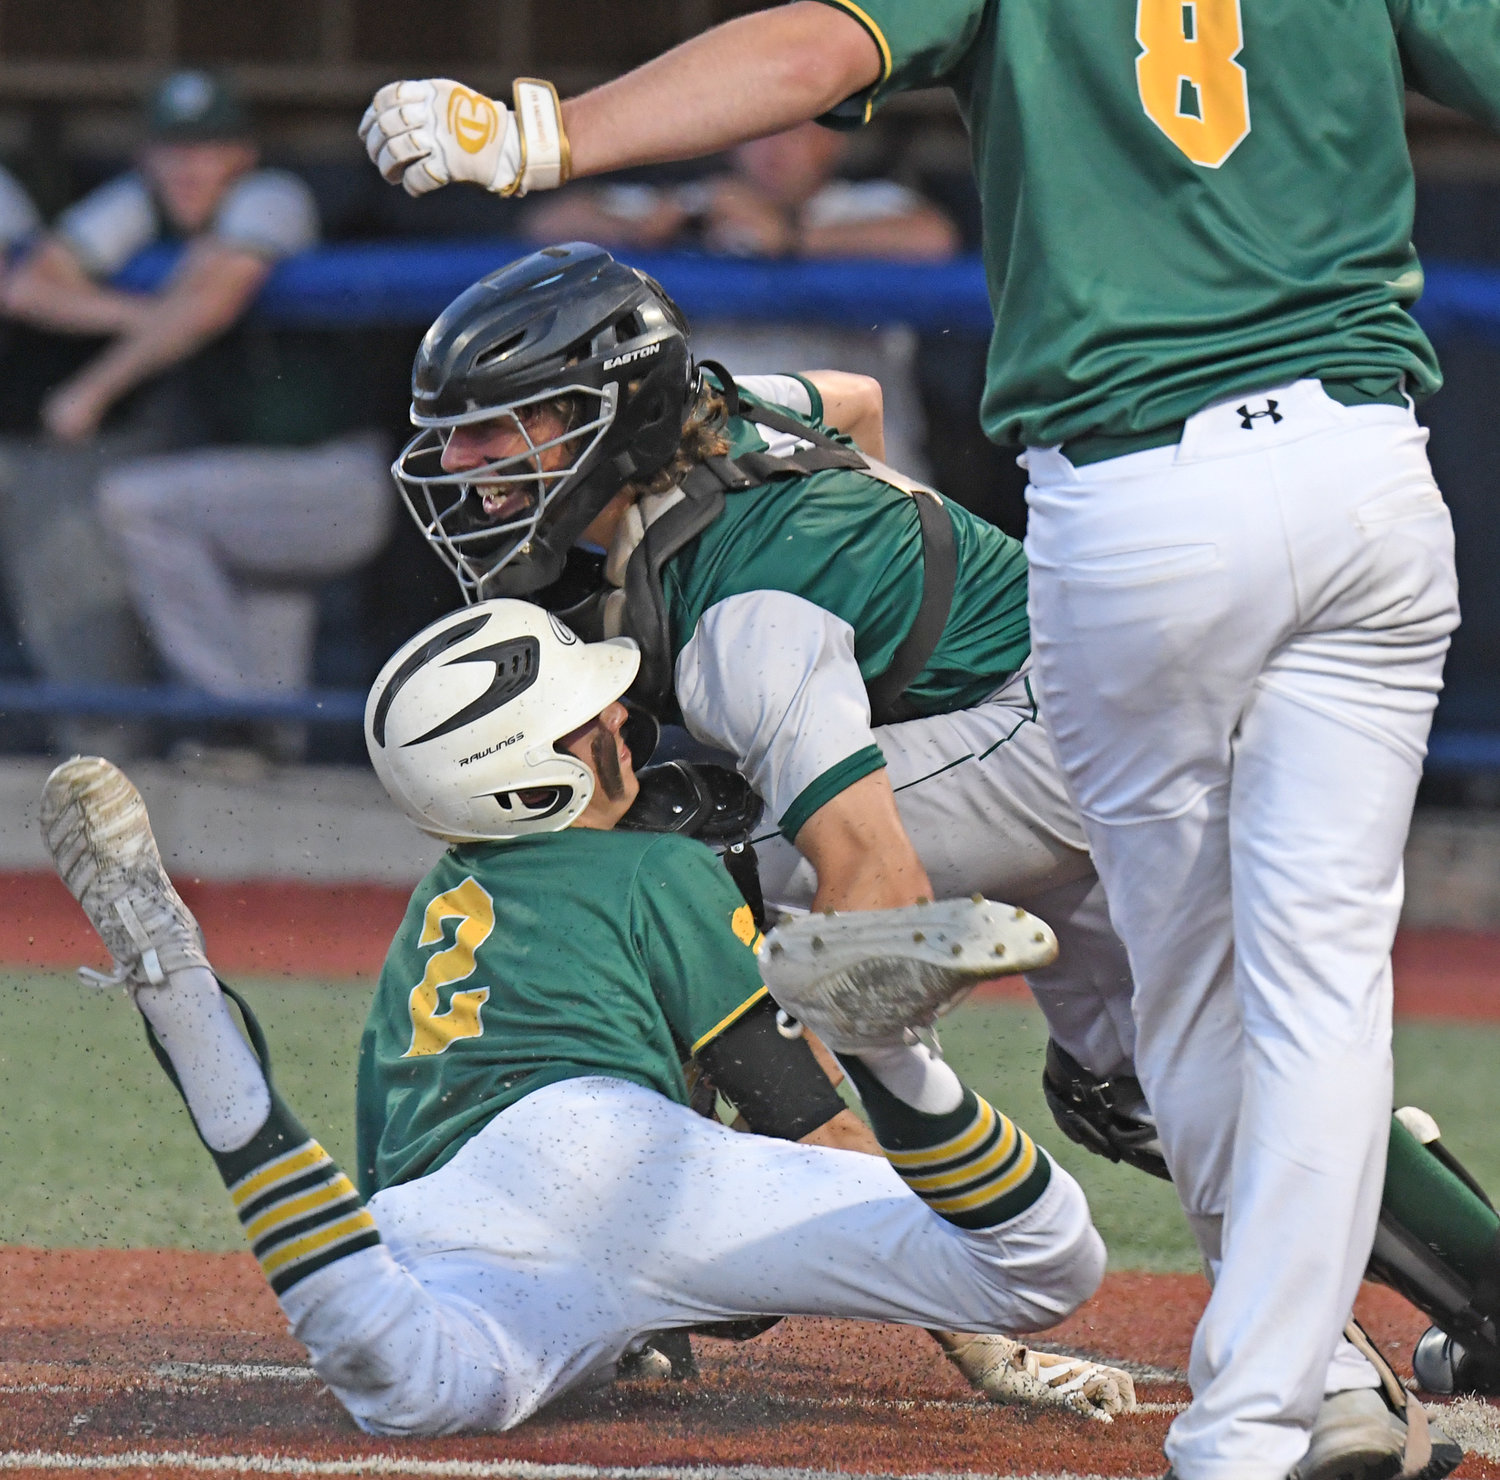 Adirondack baserunner Kreedon Rogers is tagged out by Westmoreland catcher Jerry Fiorini in his attempt to steal home in the fifth inning of his team's 6-2 win in the Section III Class C title game at Onondaga Community College.